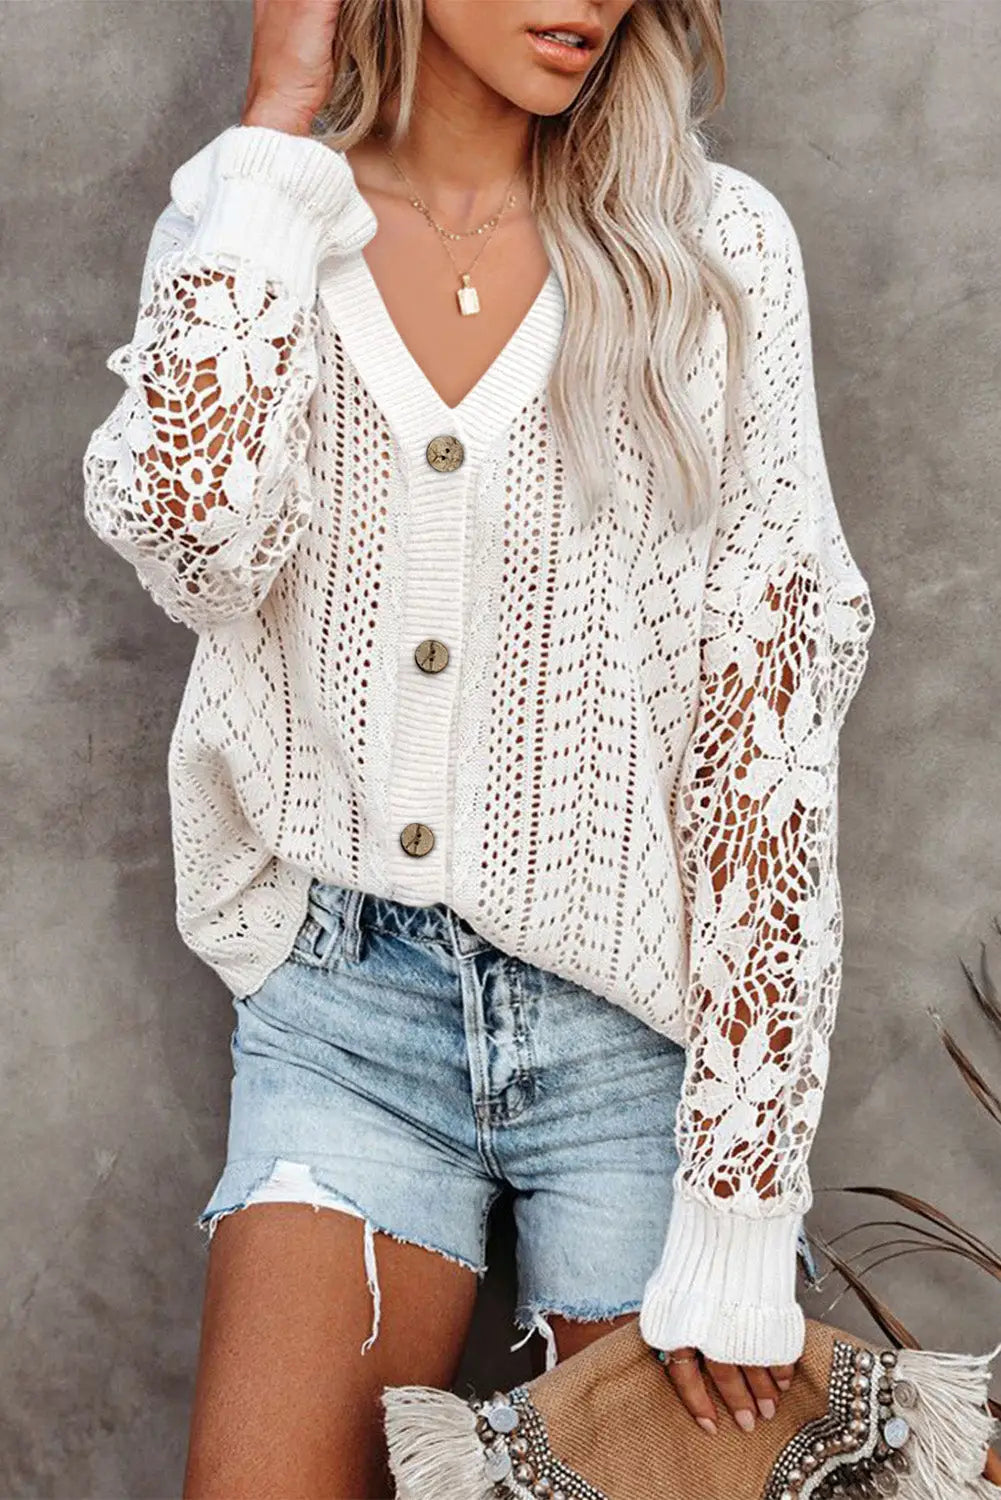 White lace crochet hollow out knit buttoned sweater - s / 55% acrylic + 45% cotton - sweaters & cardigans